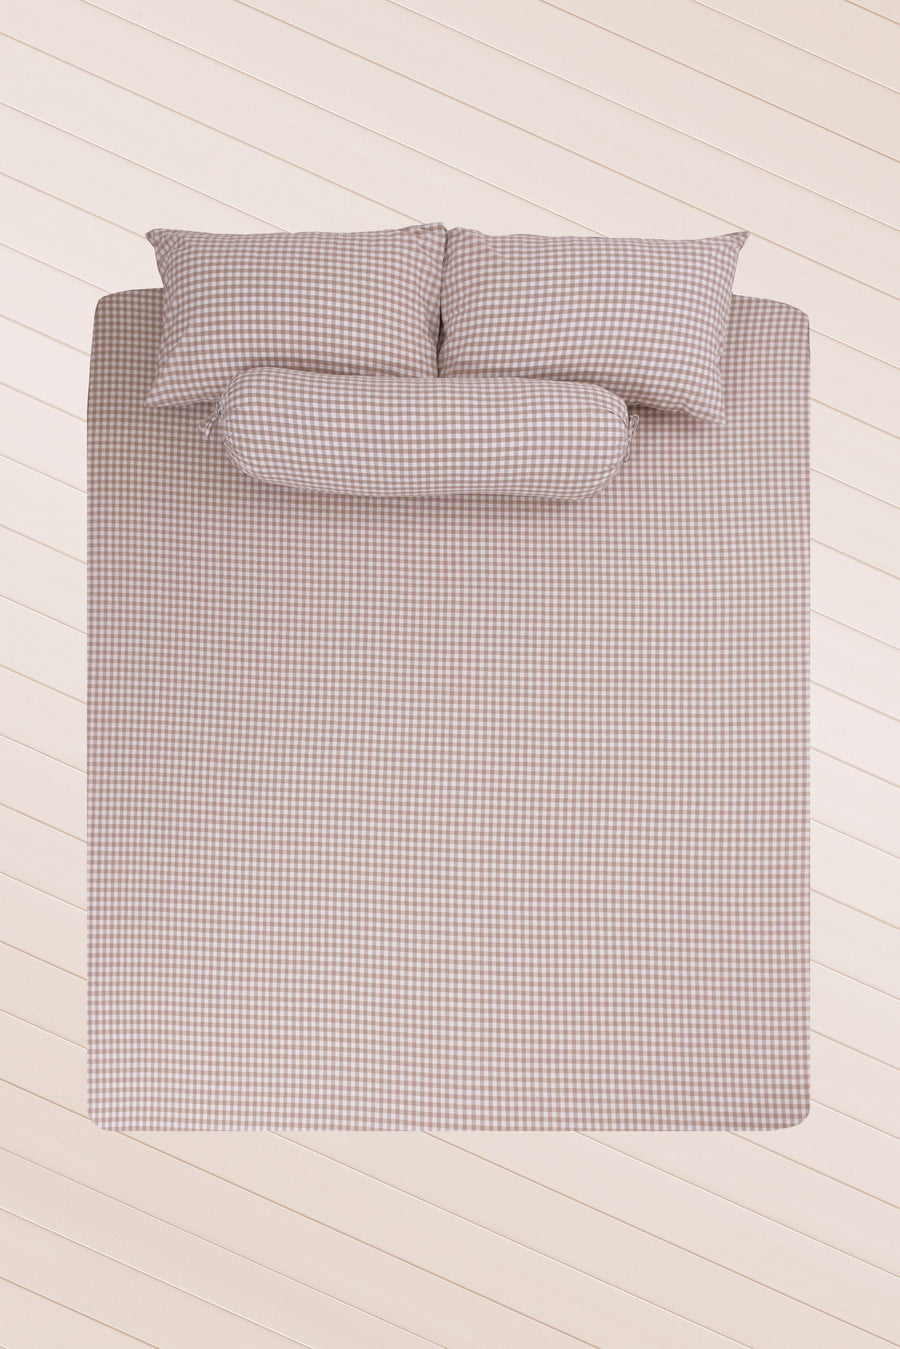 Elly Gingham K 4-pc Fitted Sheet Set (Tortilla)